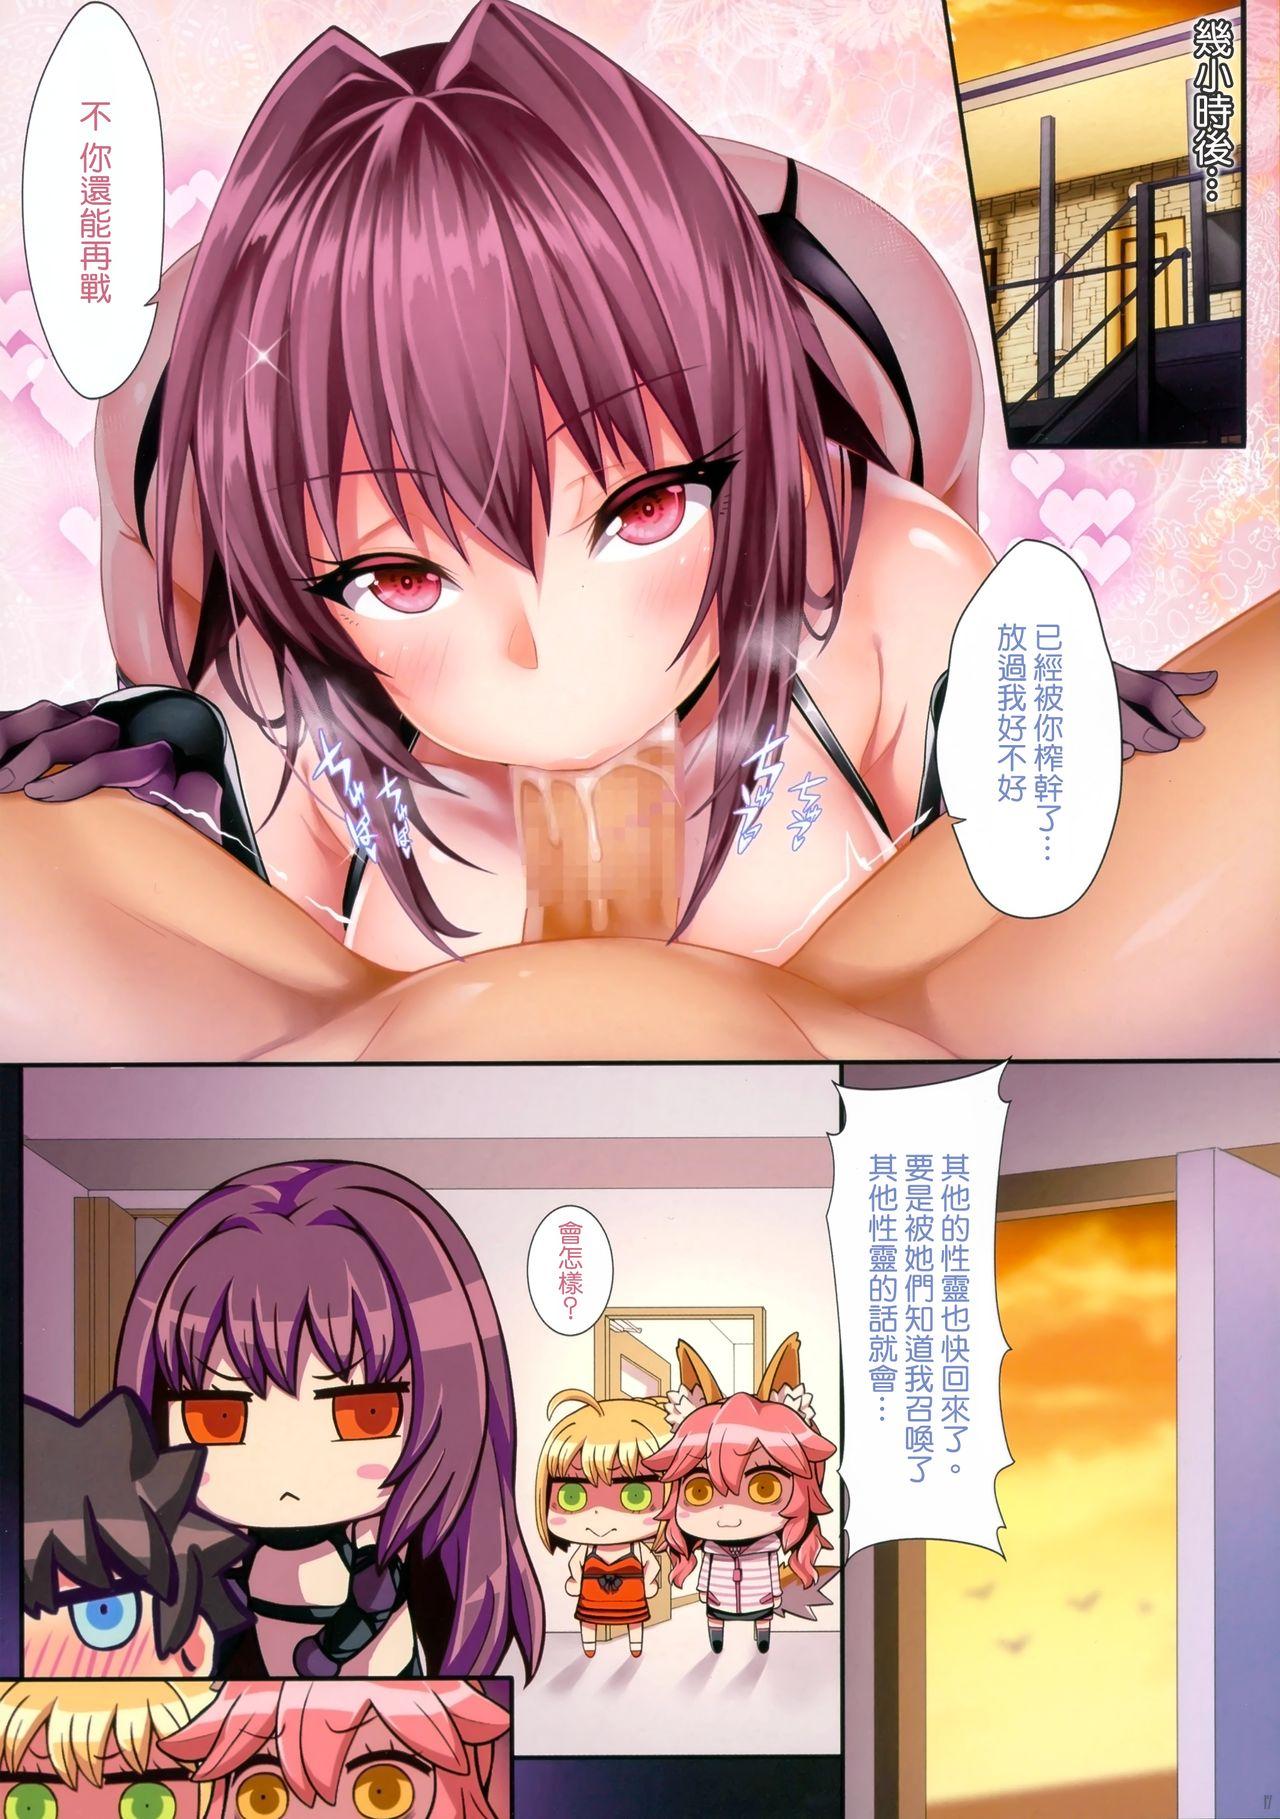 Fate/Lewd Summoning 2 Scathach Hen 17